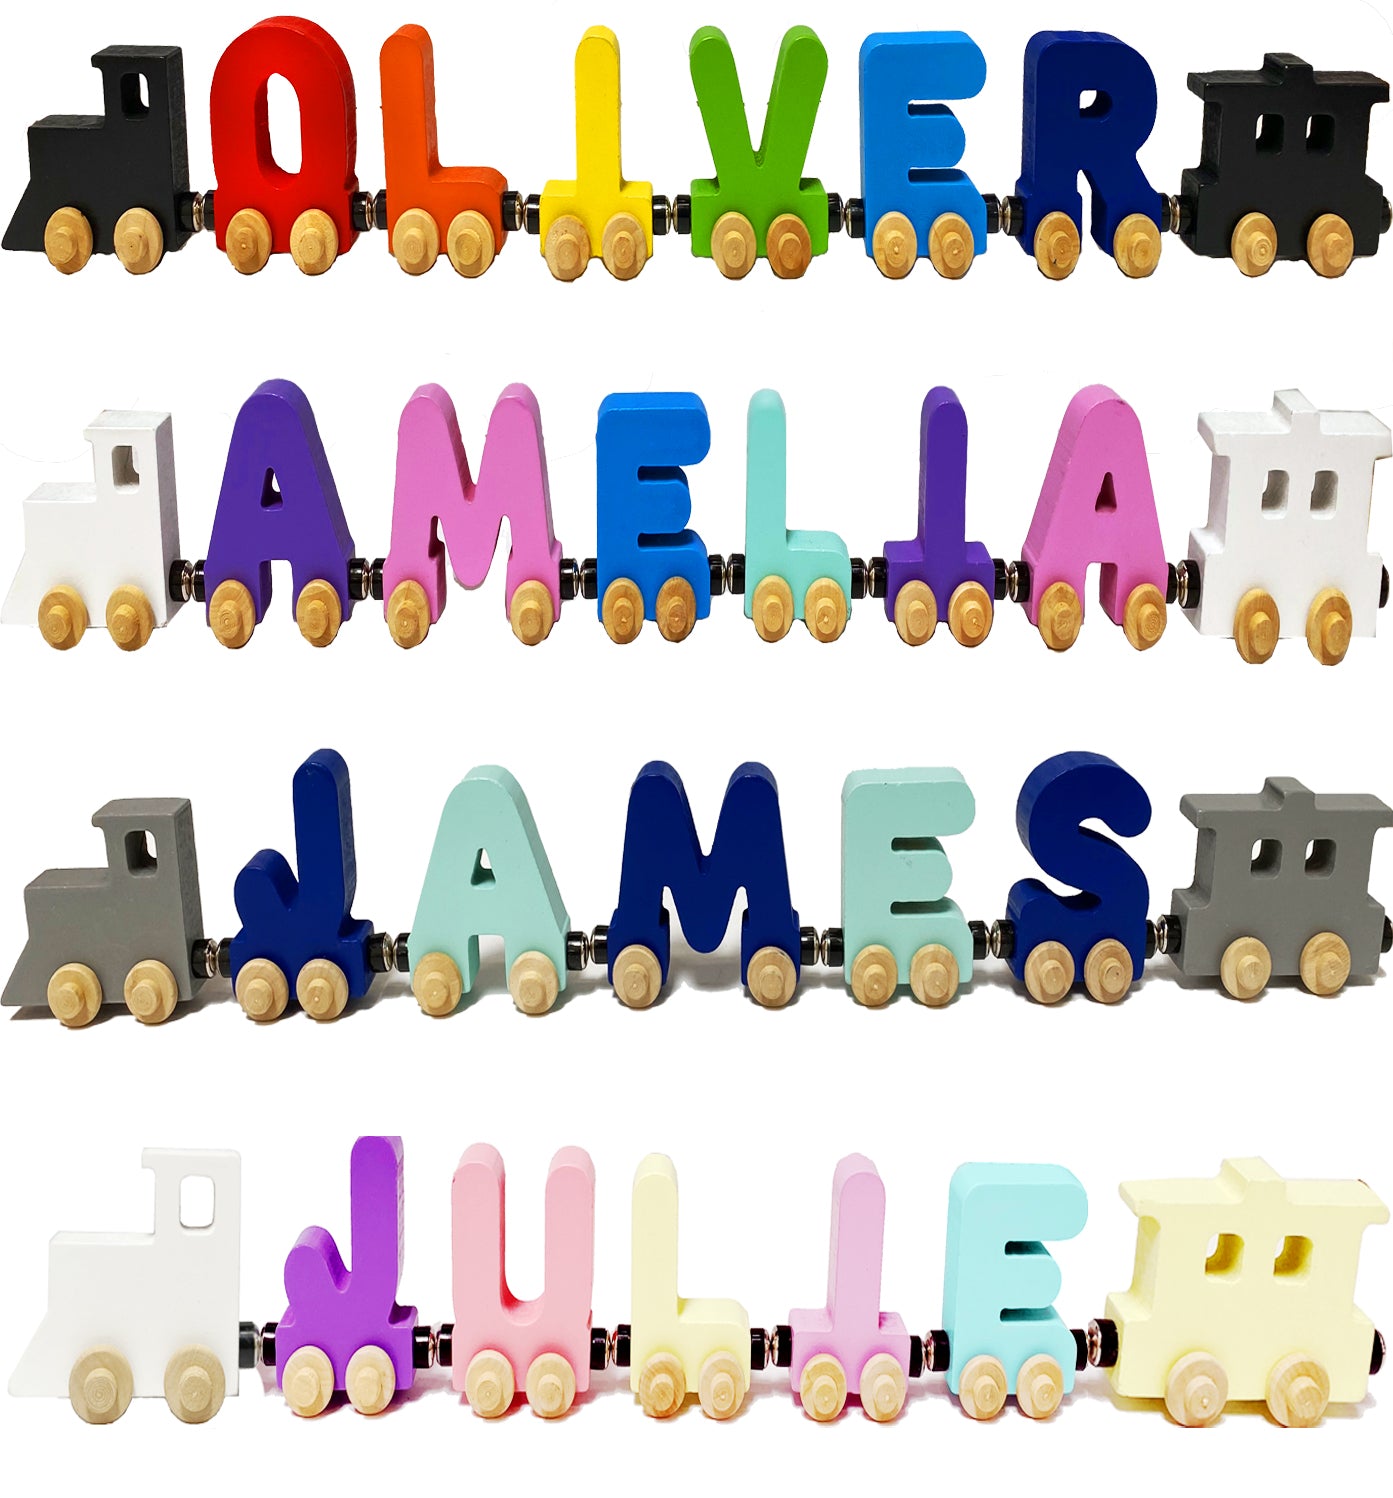 Build A Toy Train! Your Name Letter Railroad Puzzle Includes Train & Wagon (B07YL7FDHM)